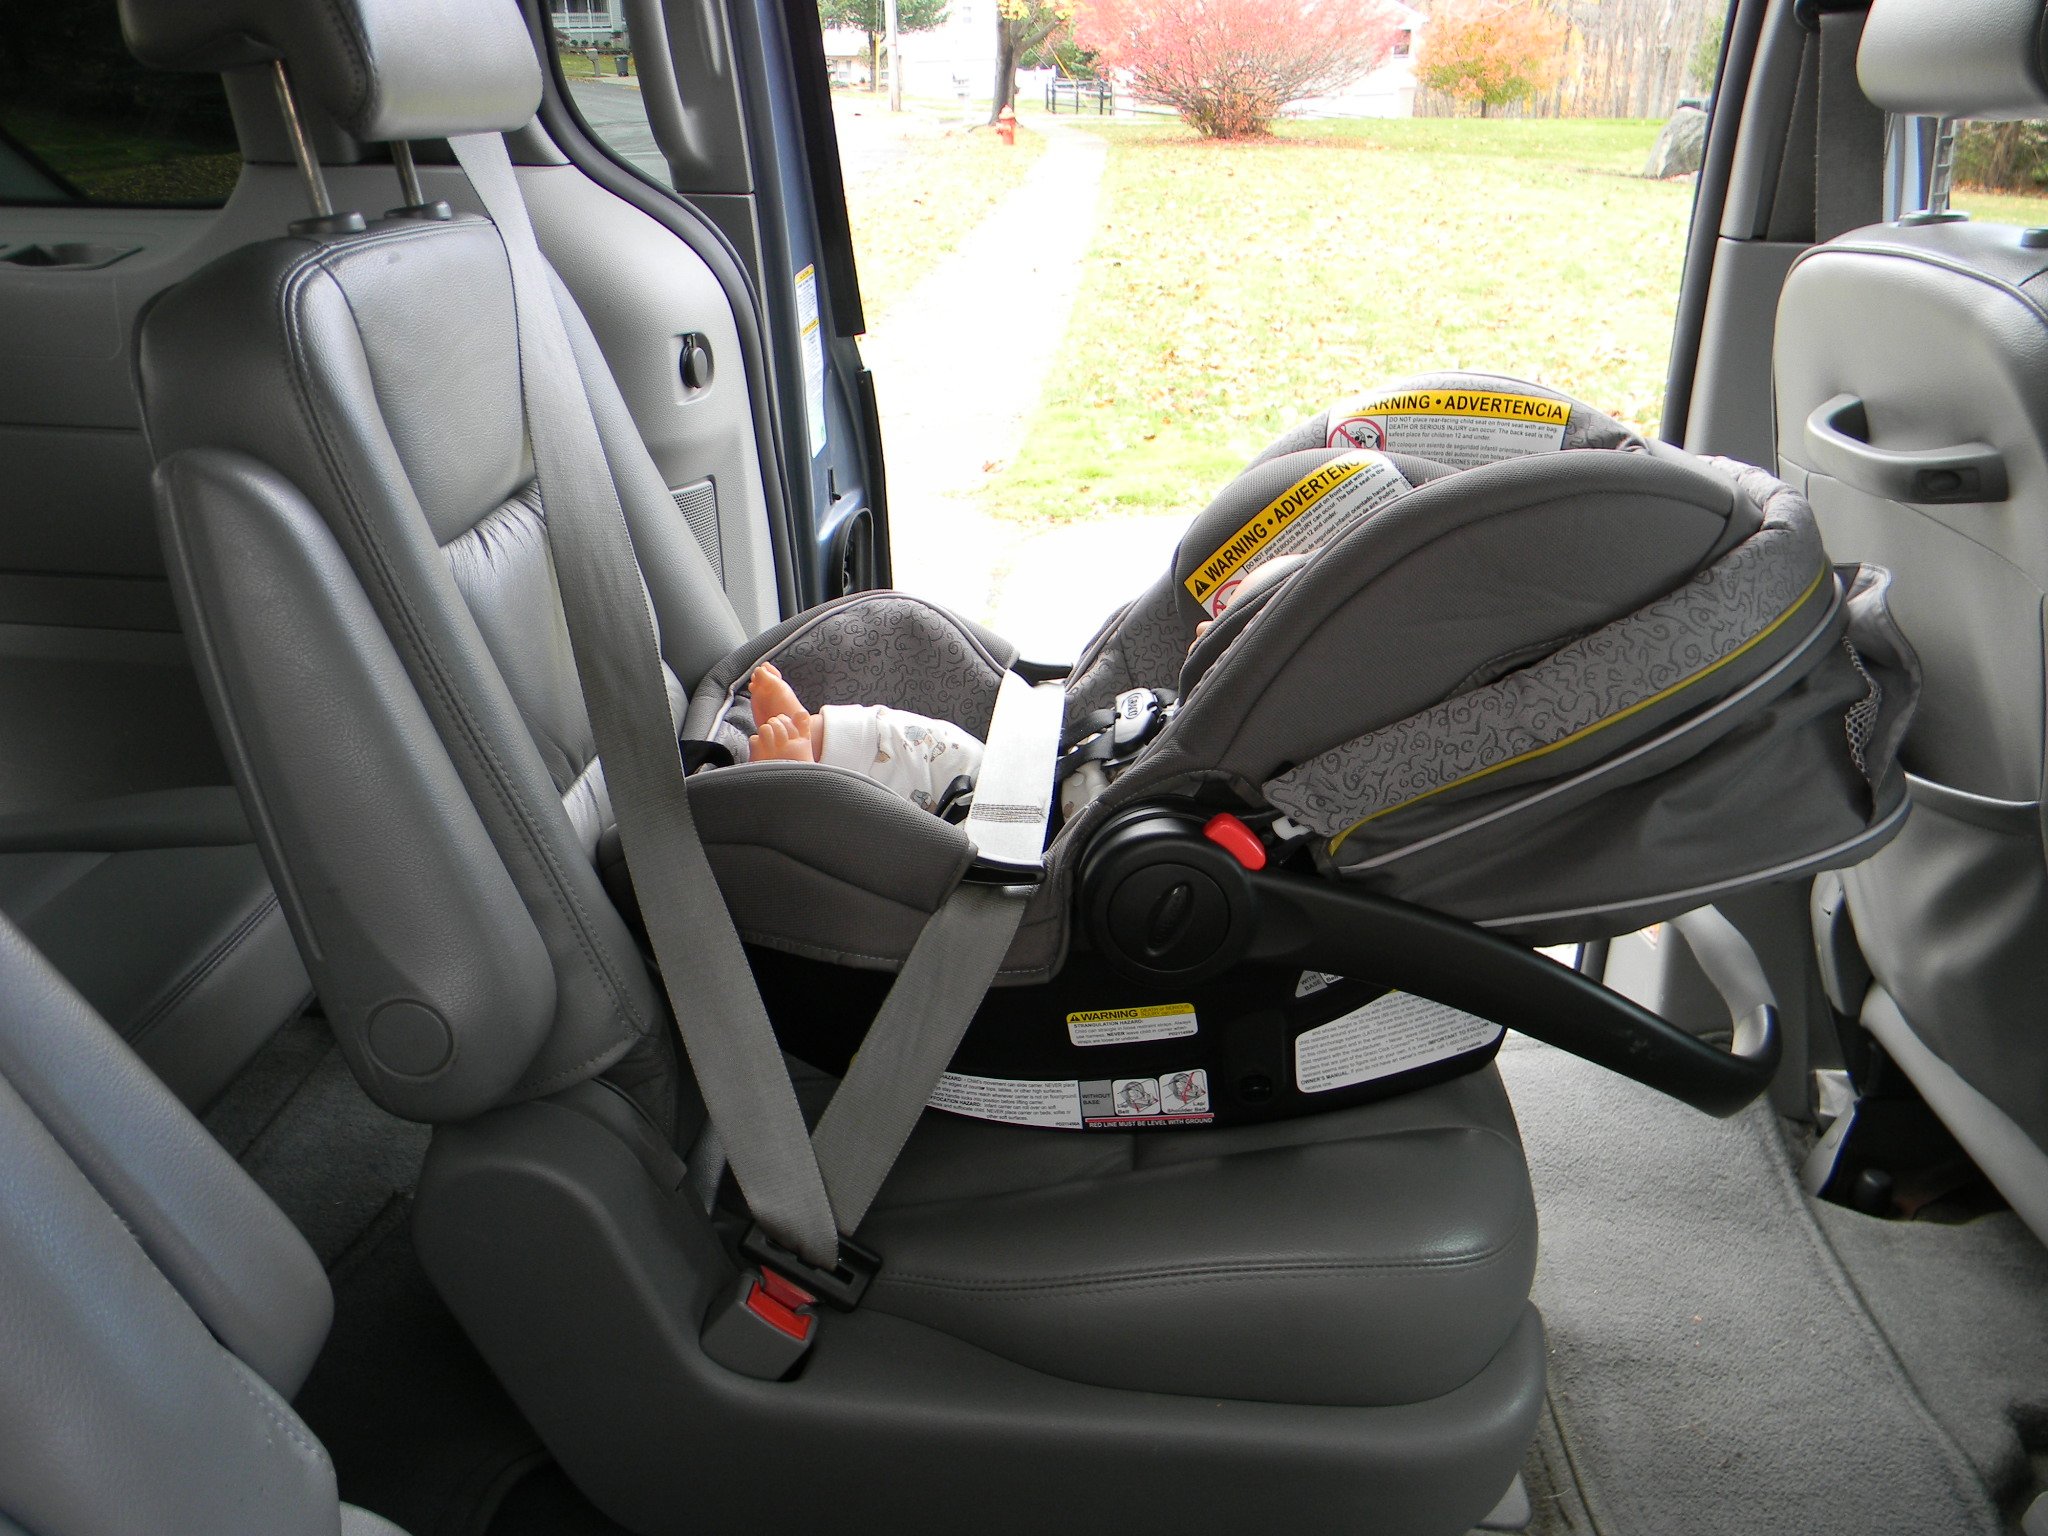 How To Install Graco Car Seat Without Base